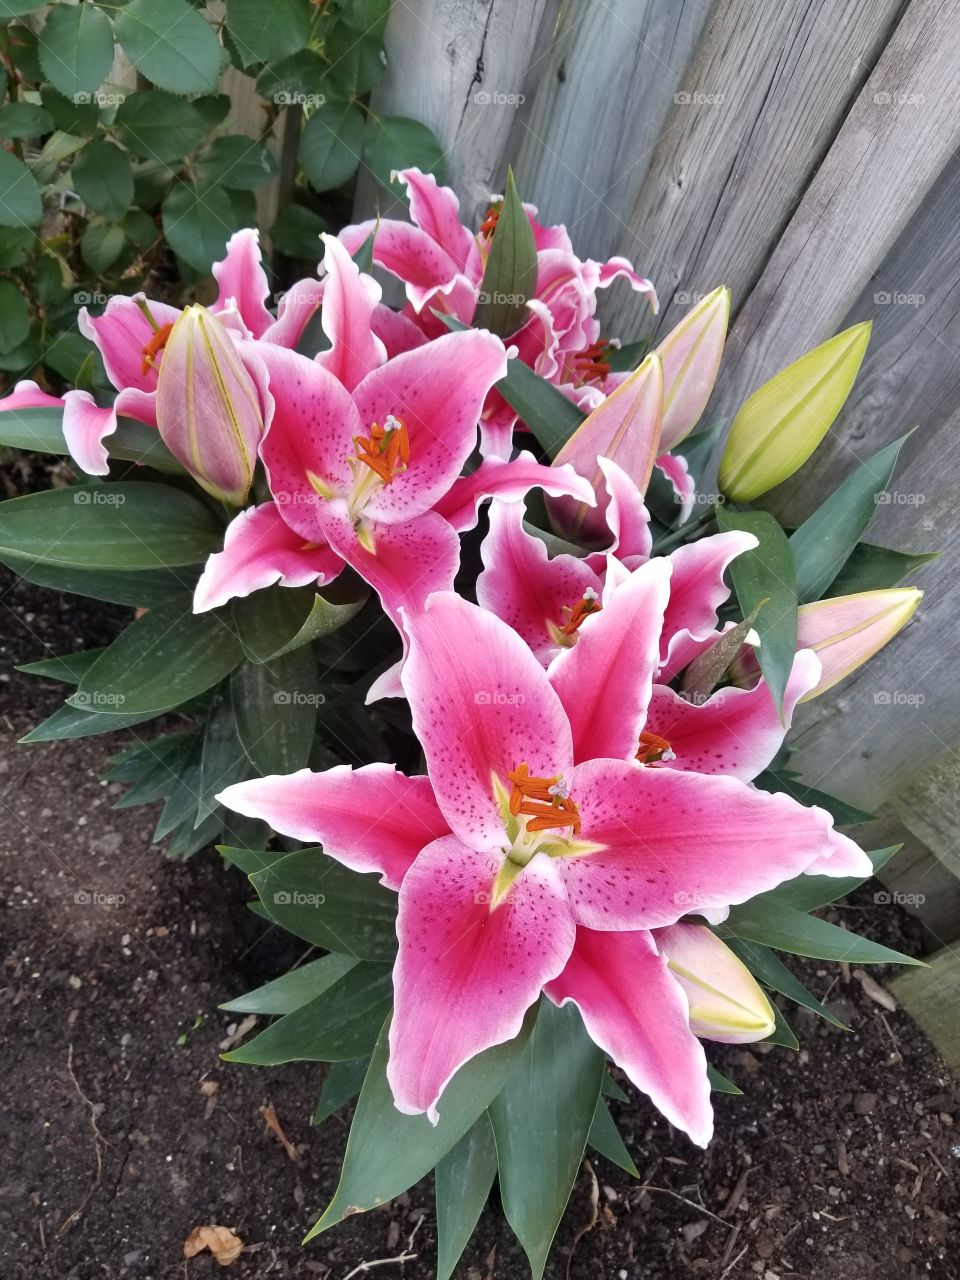 Hot pink lily